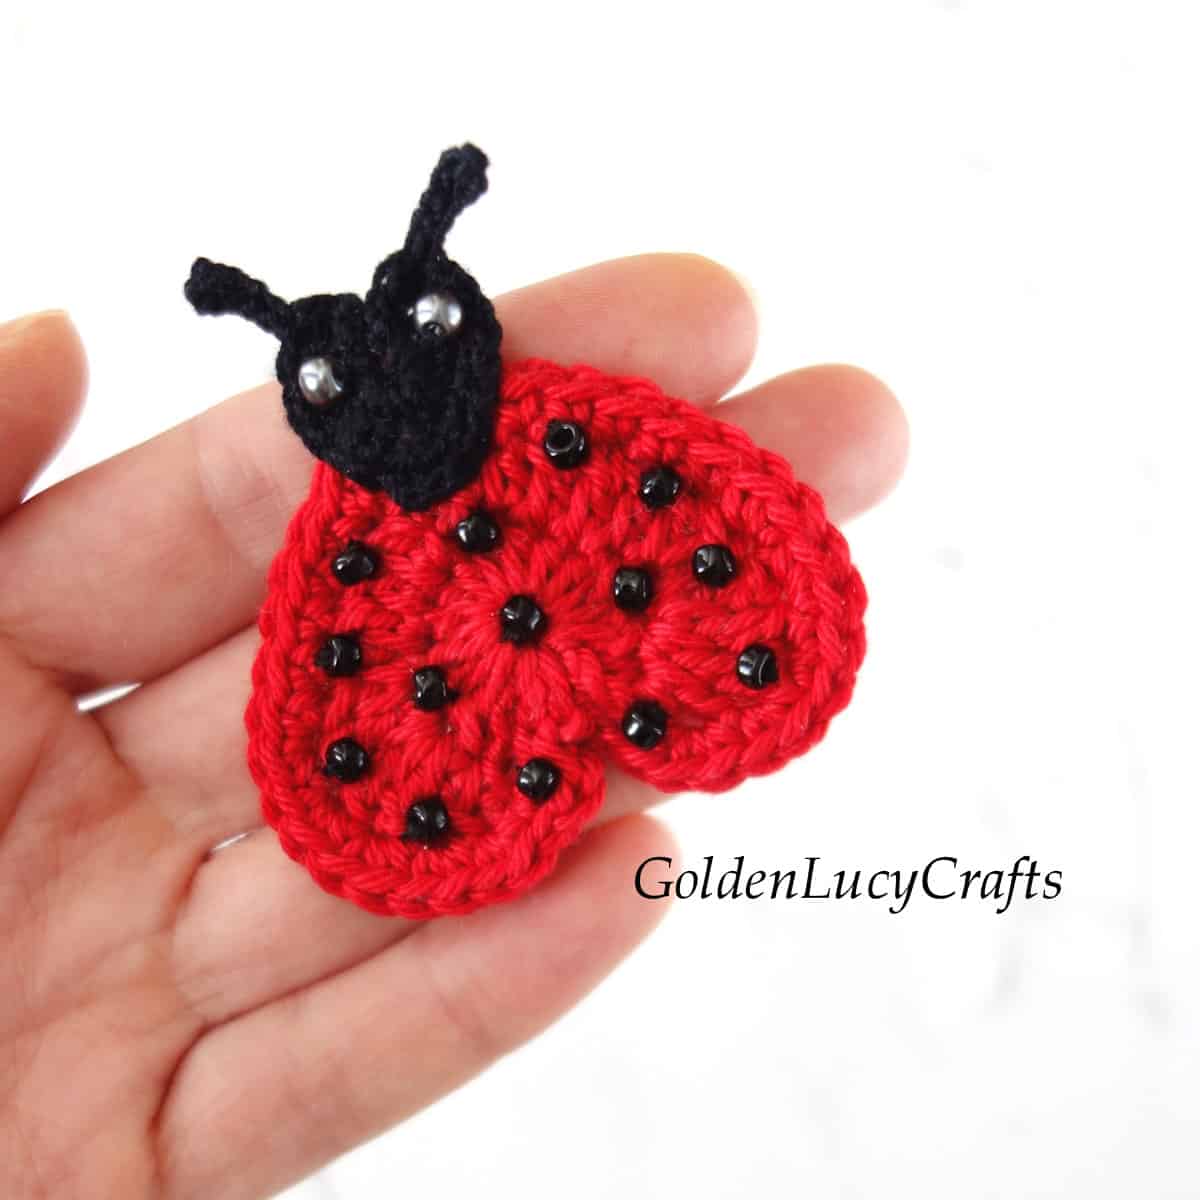 Crochet heart ladybug applique in the palm of a hand.